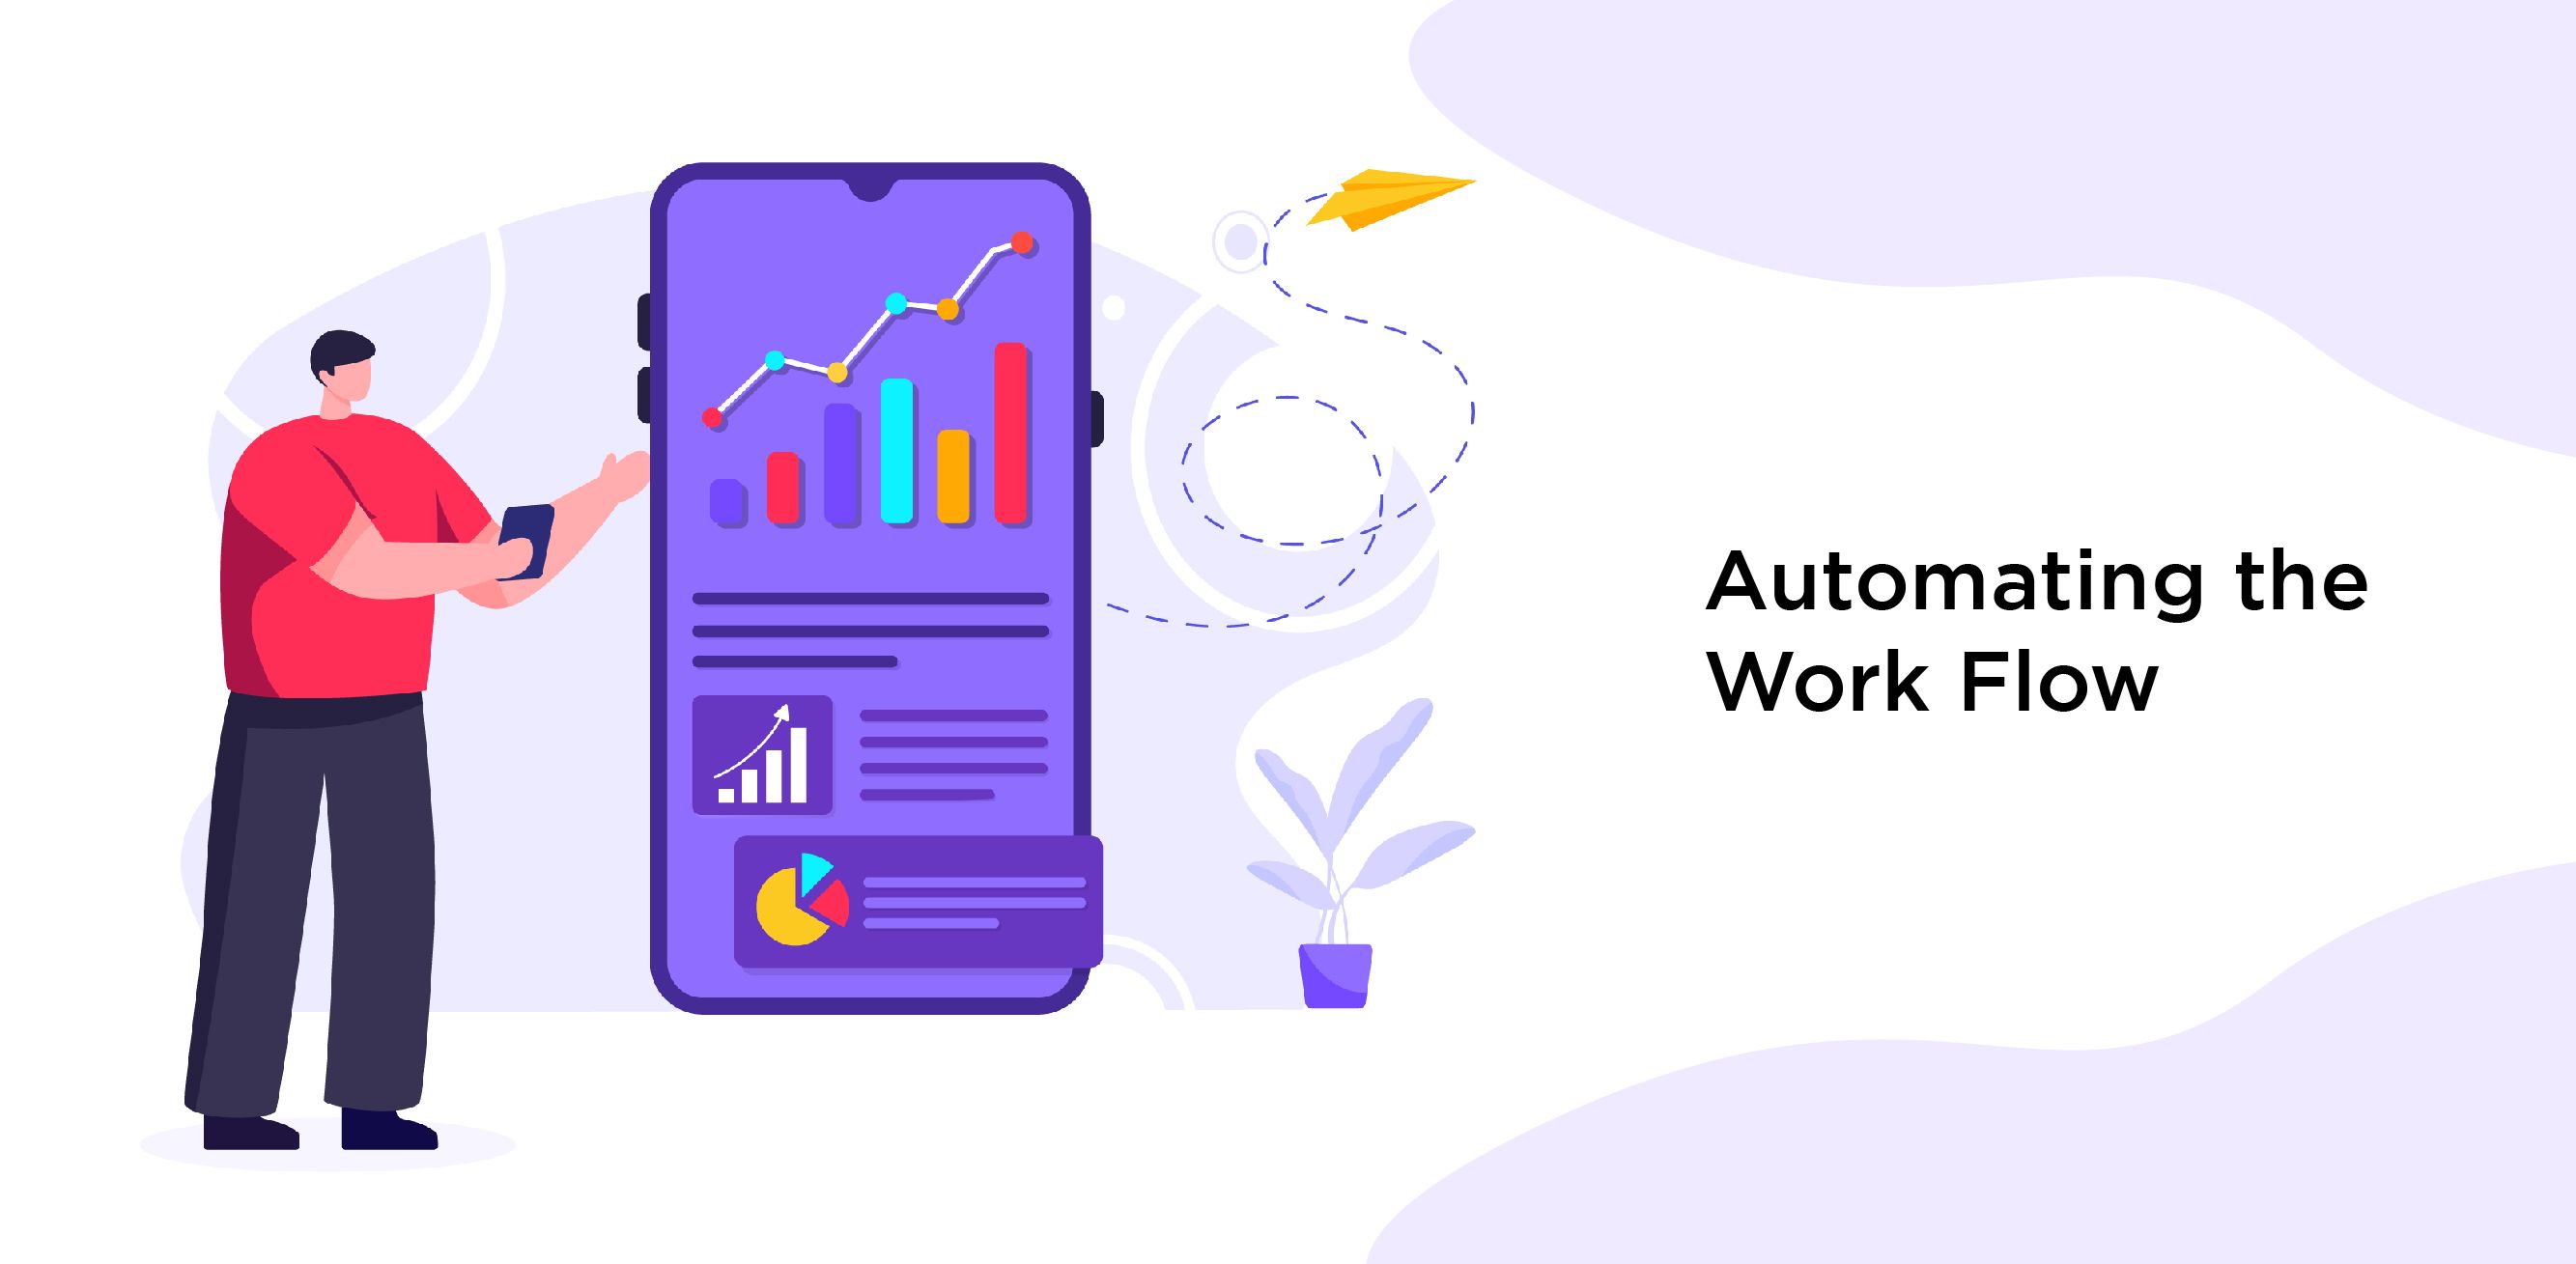 Automating the Work Flow